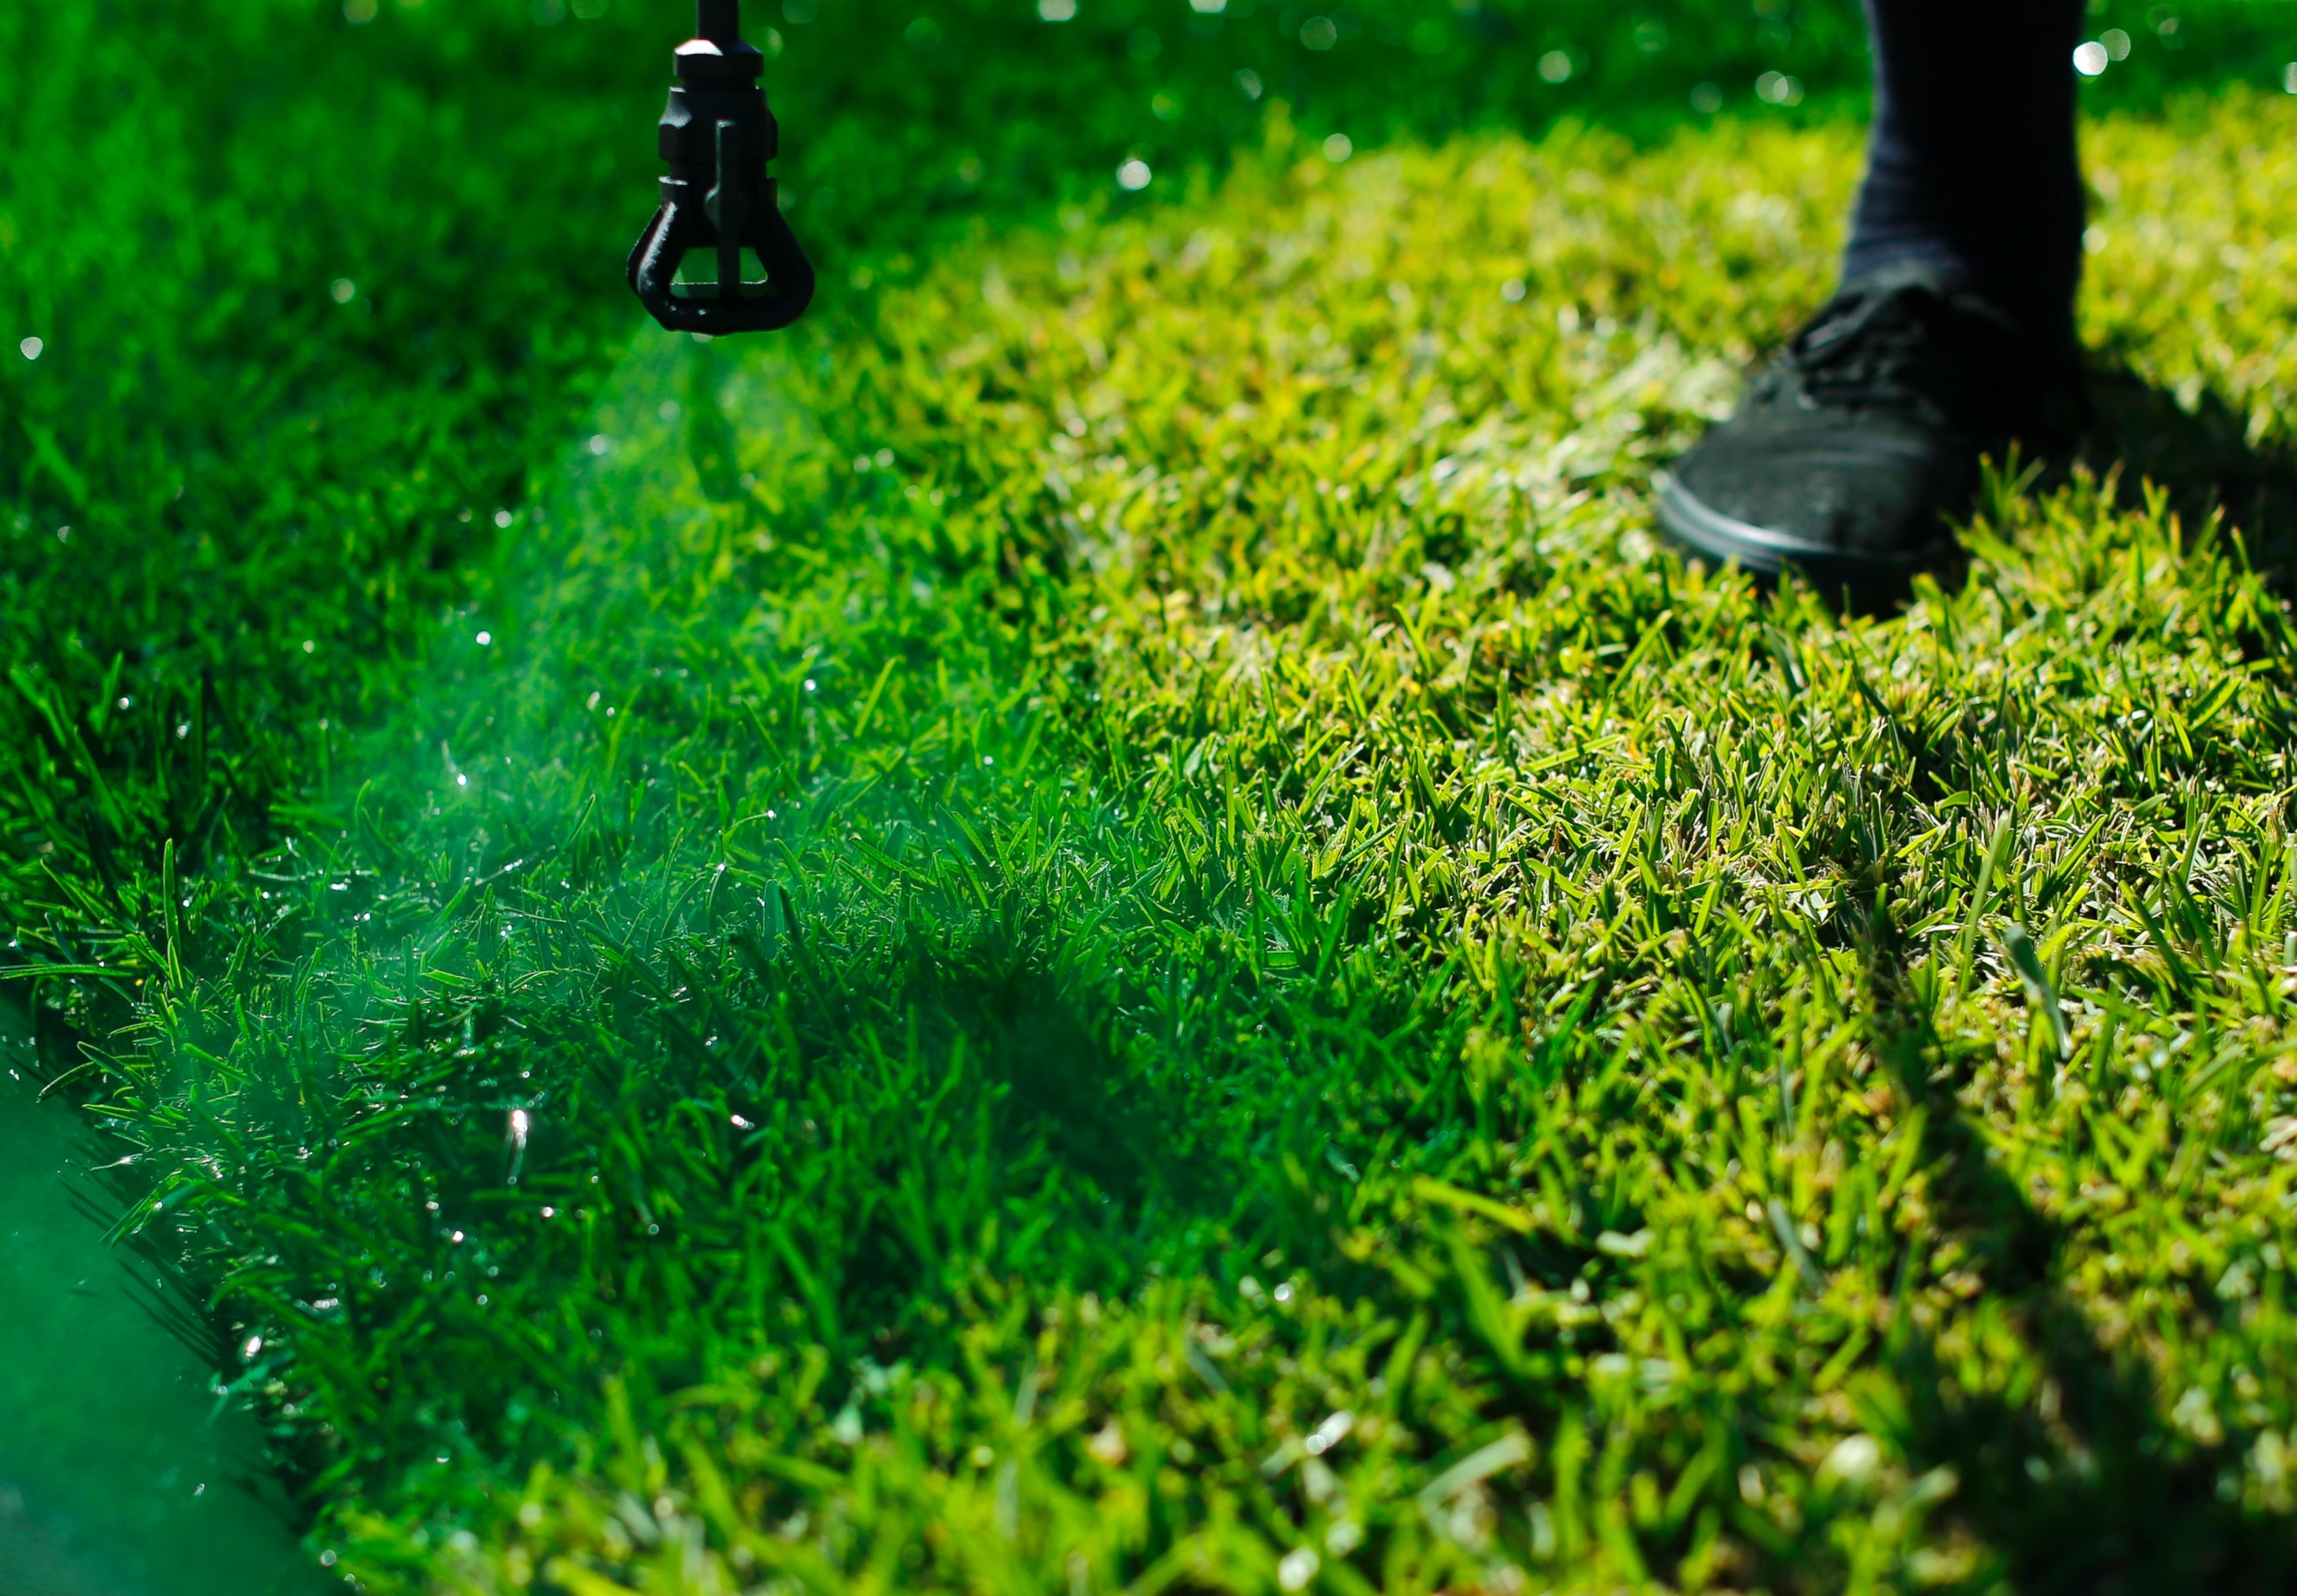 PHOTO: Drew McClellan of A lucky Lawn applies green dye onto drought affected grass at a home in Santa Fe Springs, Calif., Oct. 1, 2014.